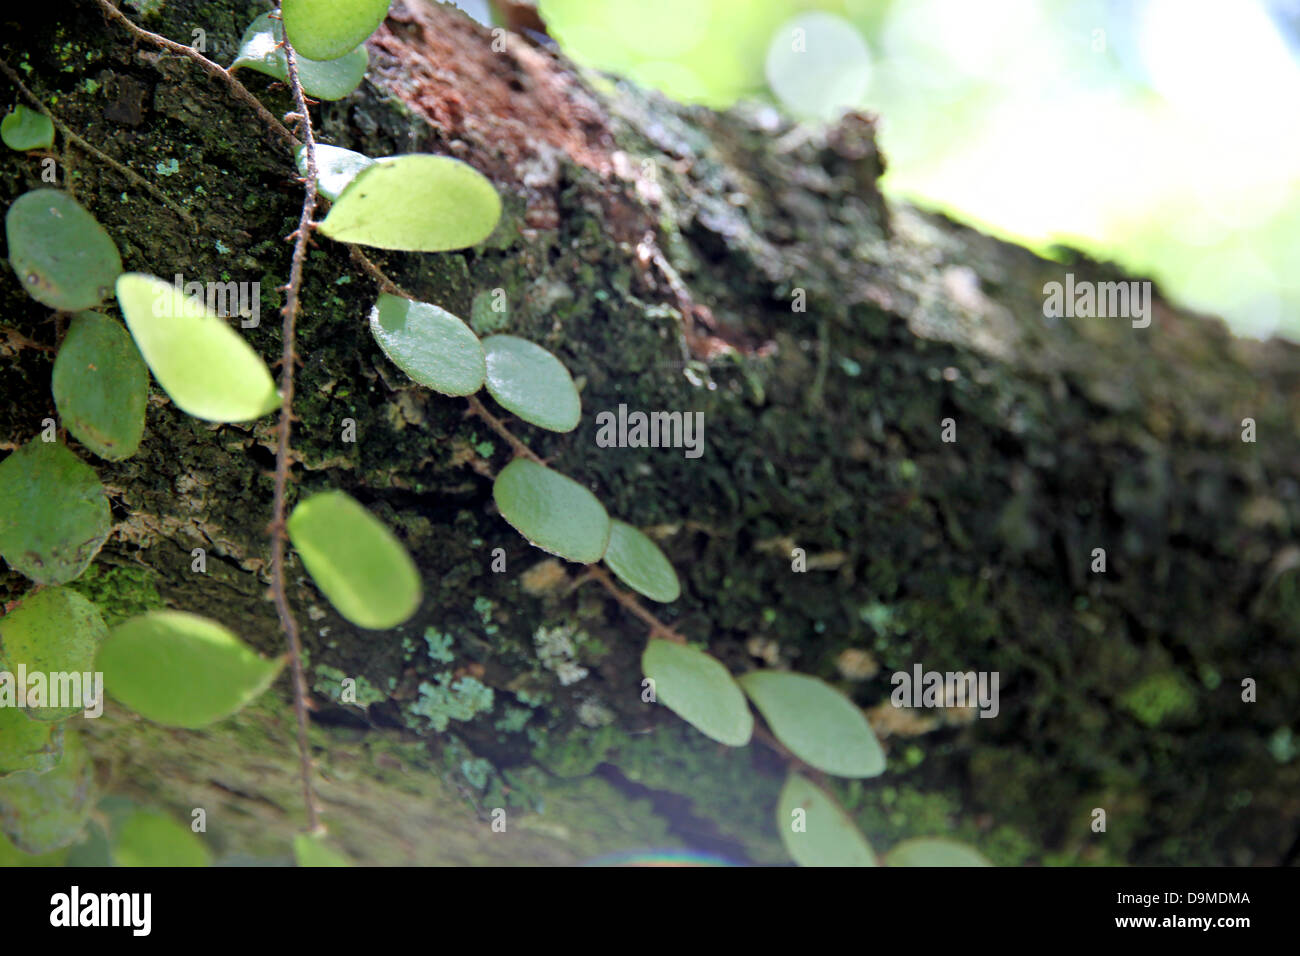 small Vine leaves growing on the branches of large tree. Stock Photo